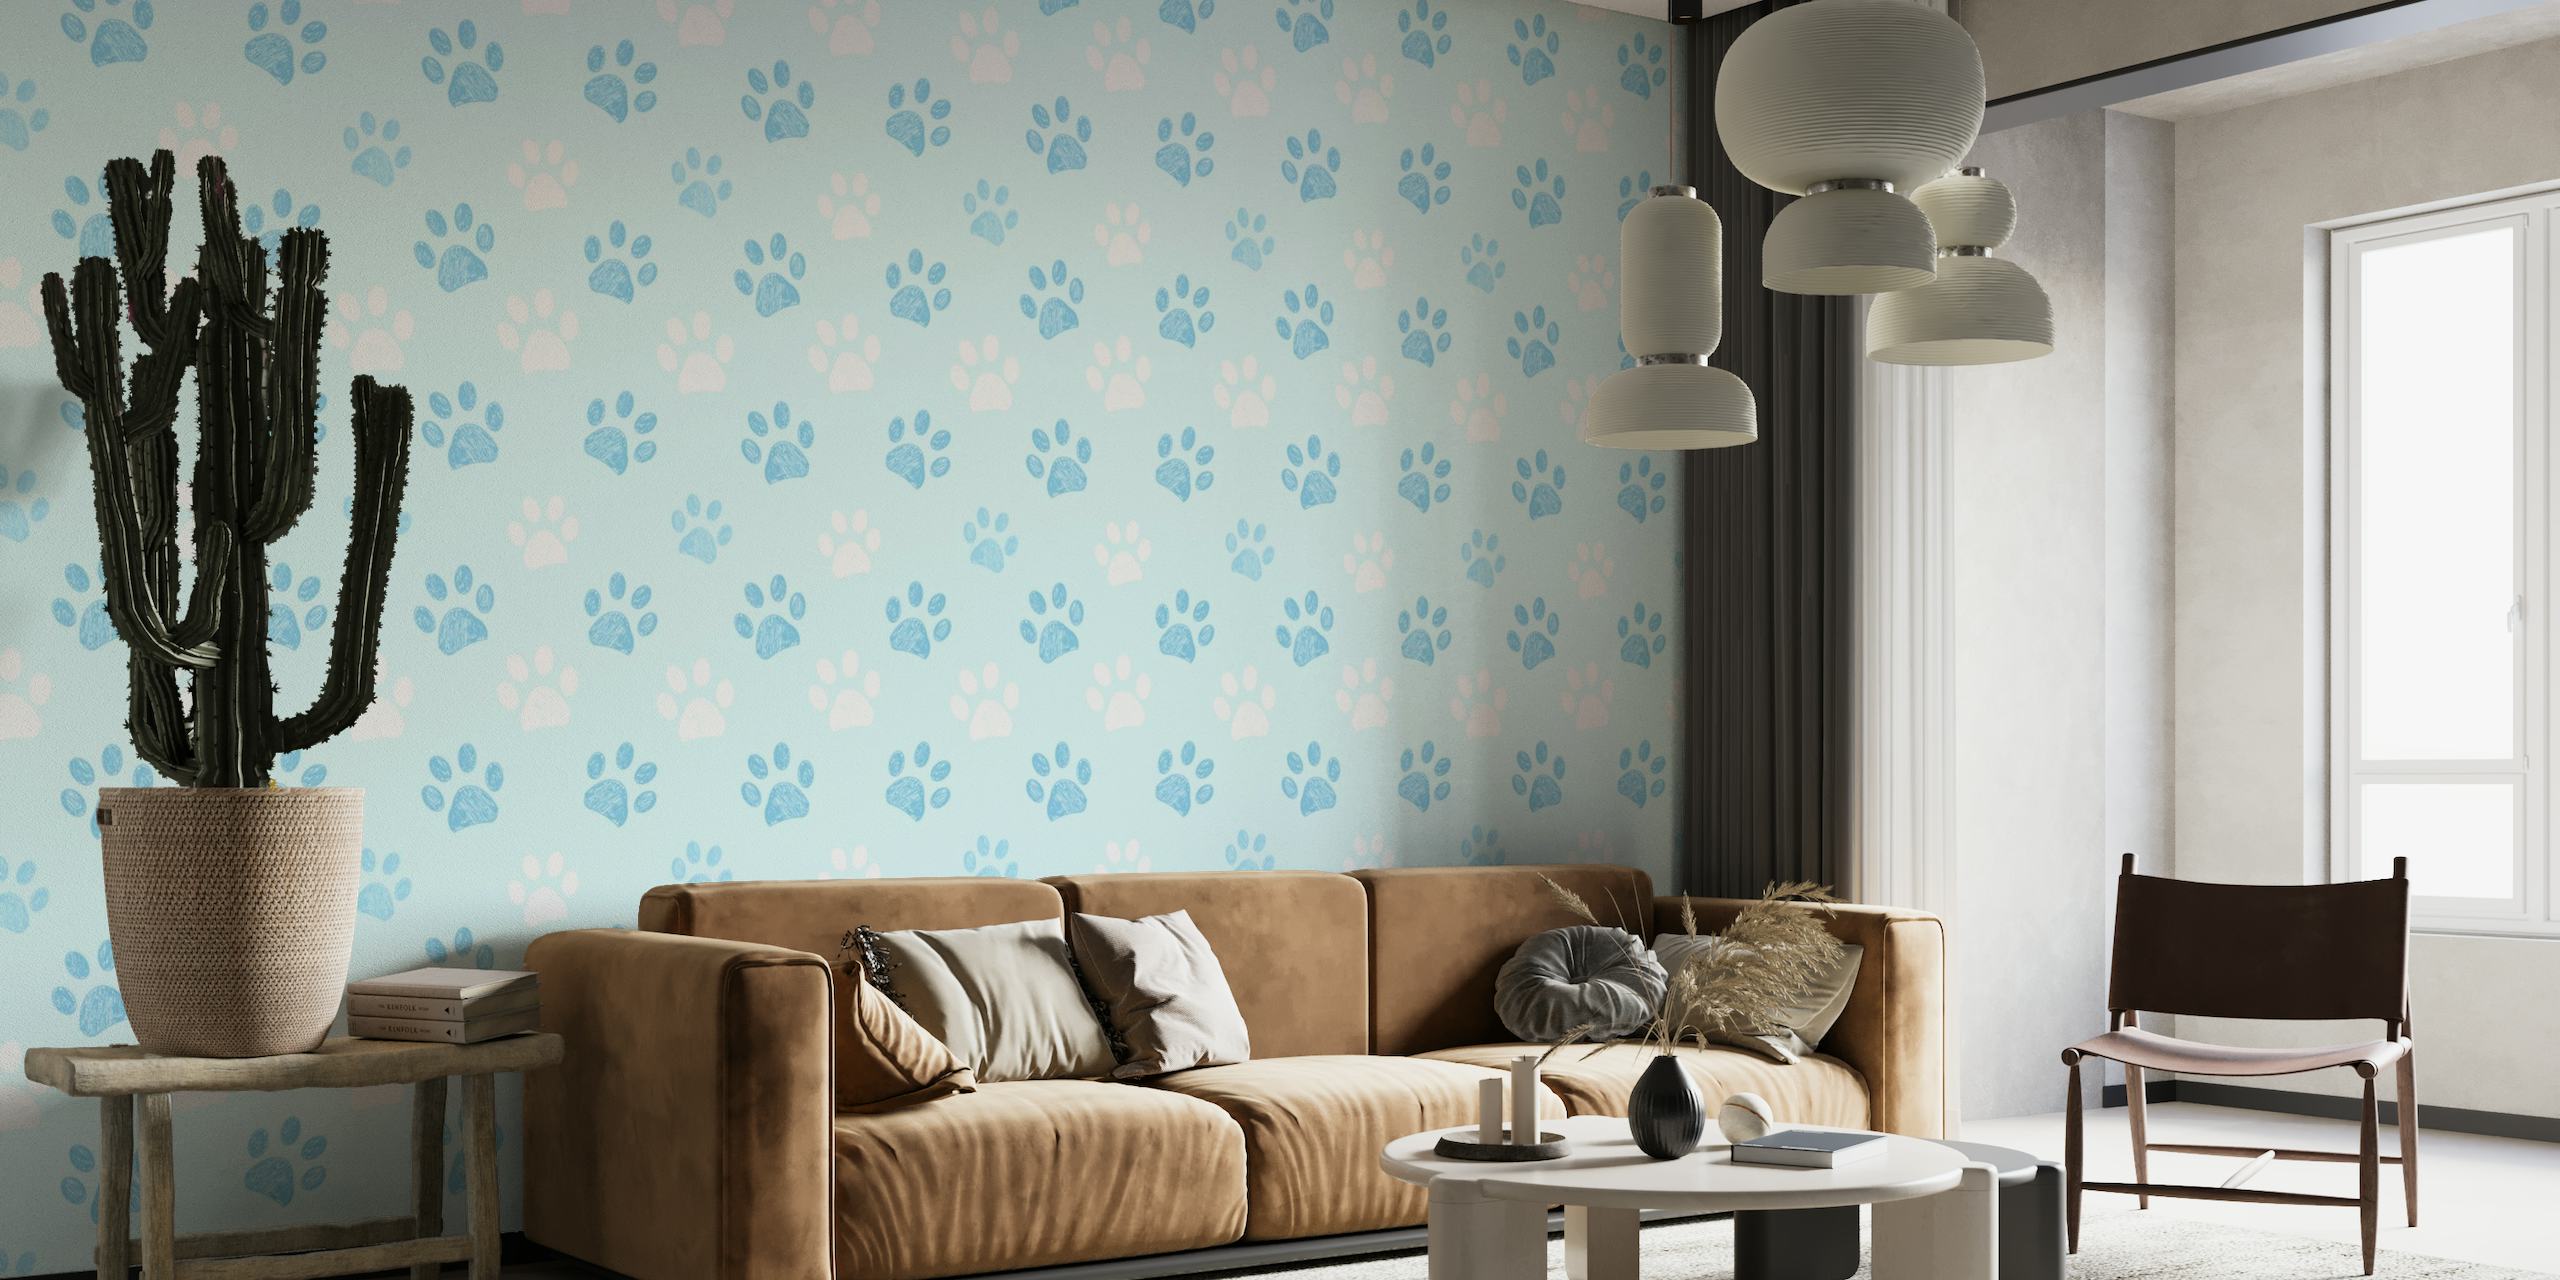 Illustrative wall mural with blue doodle paw prints on a light blue background